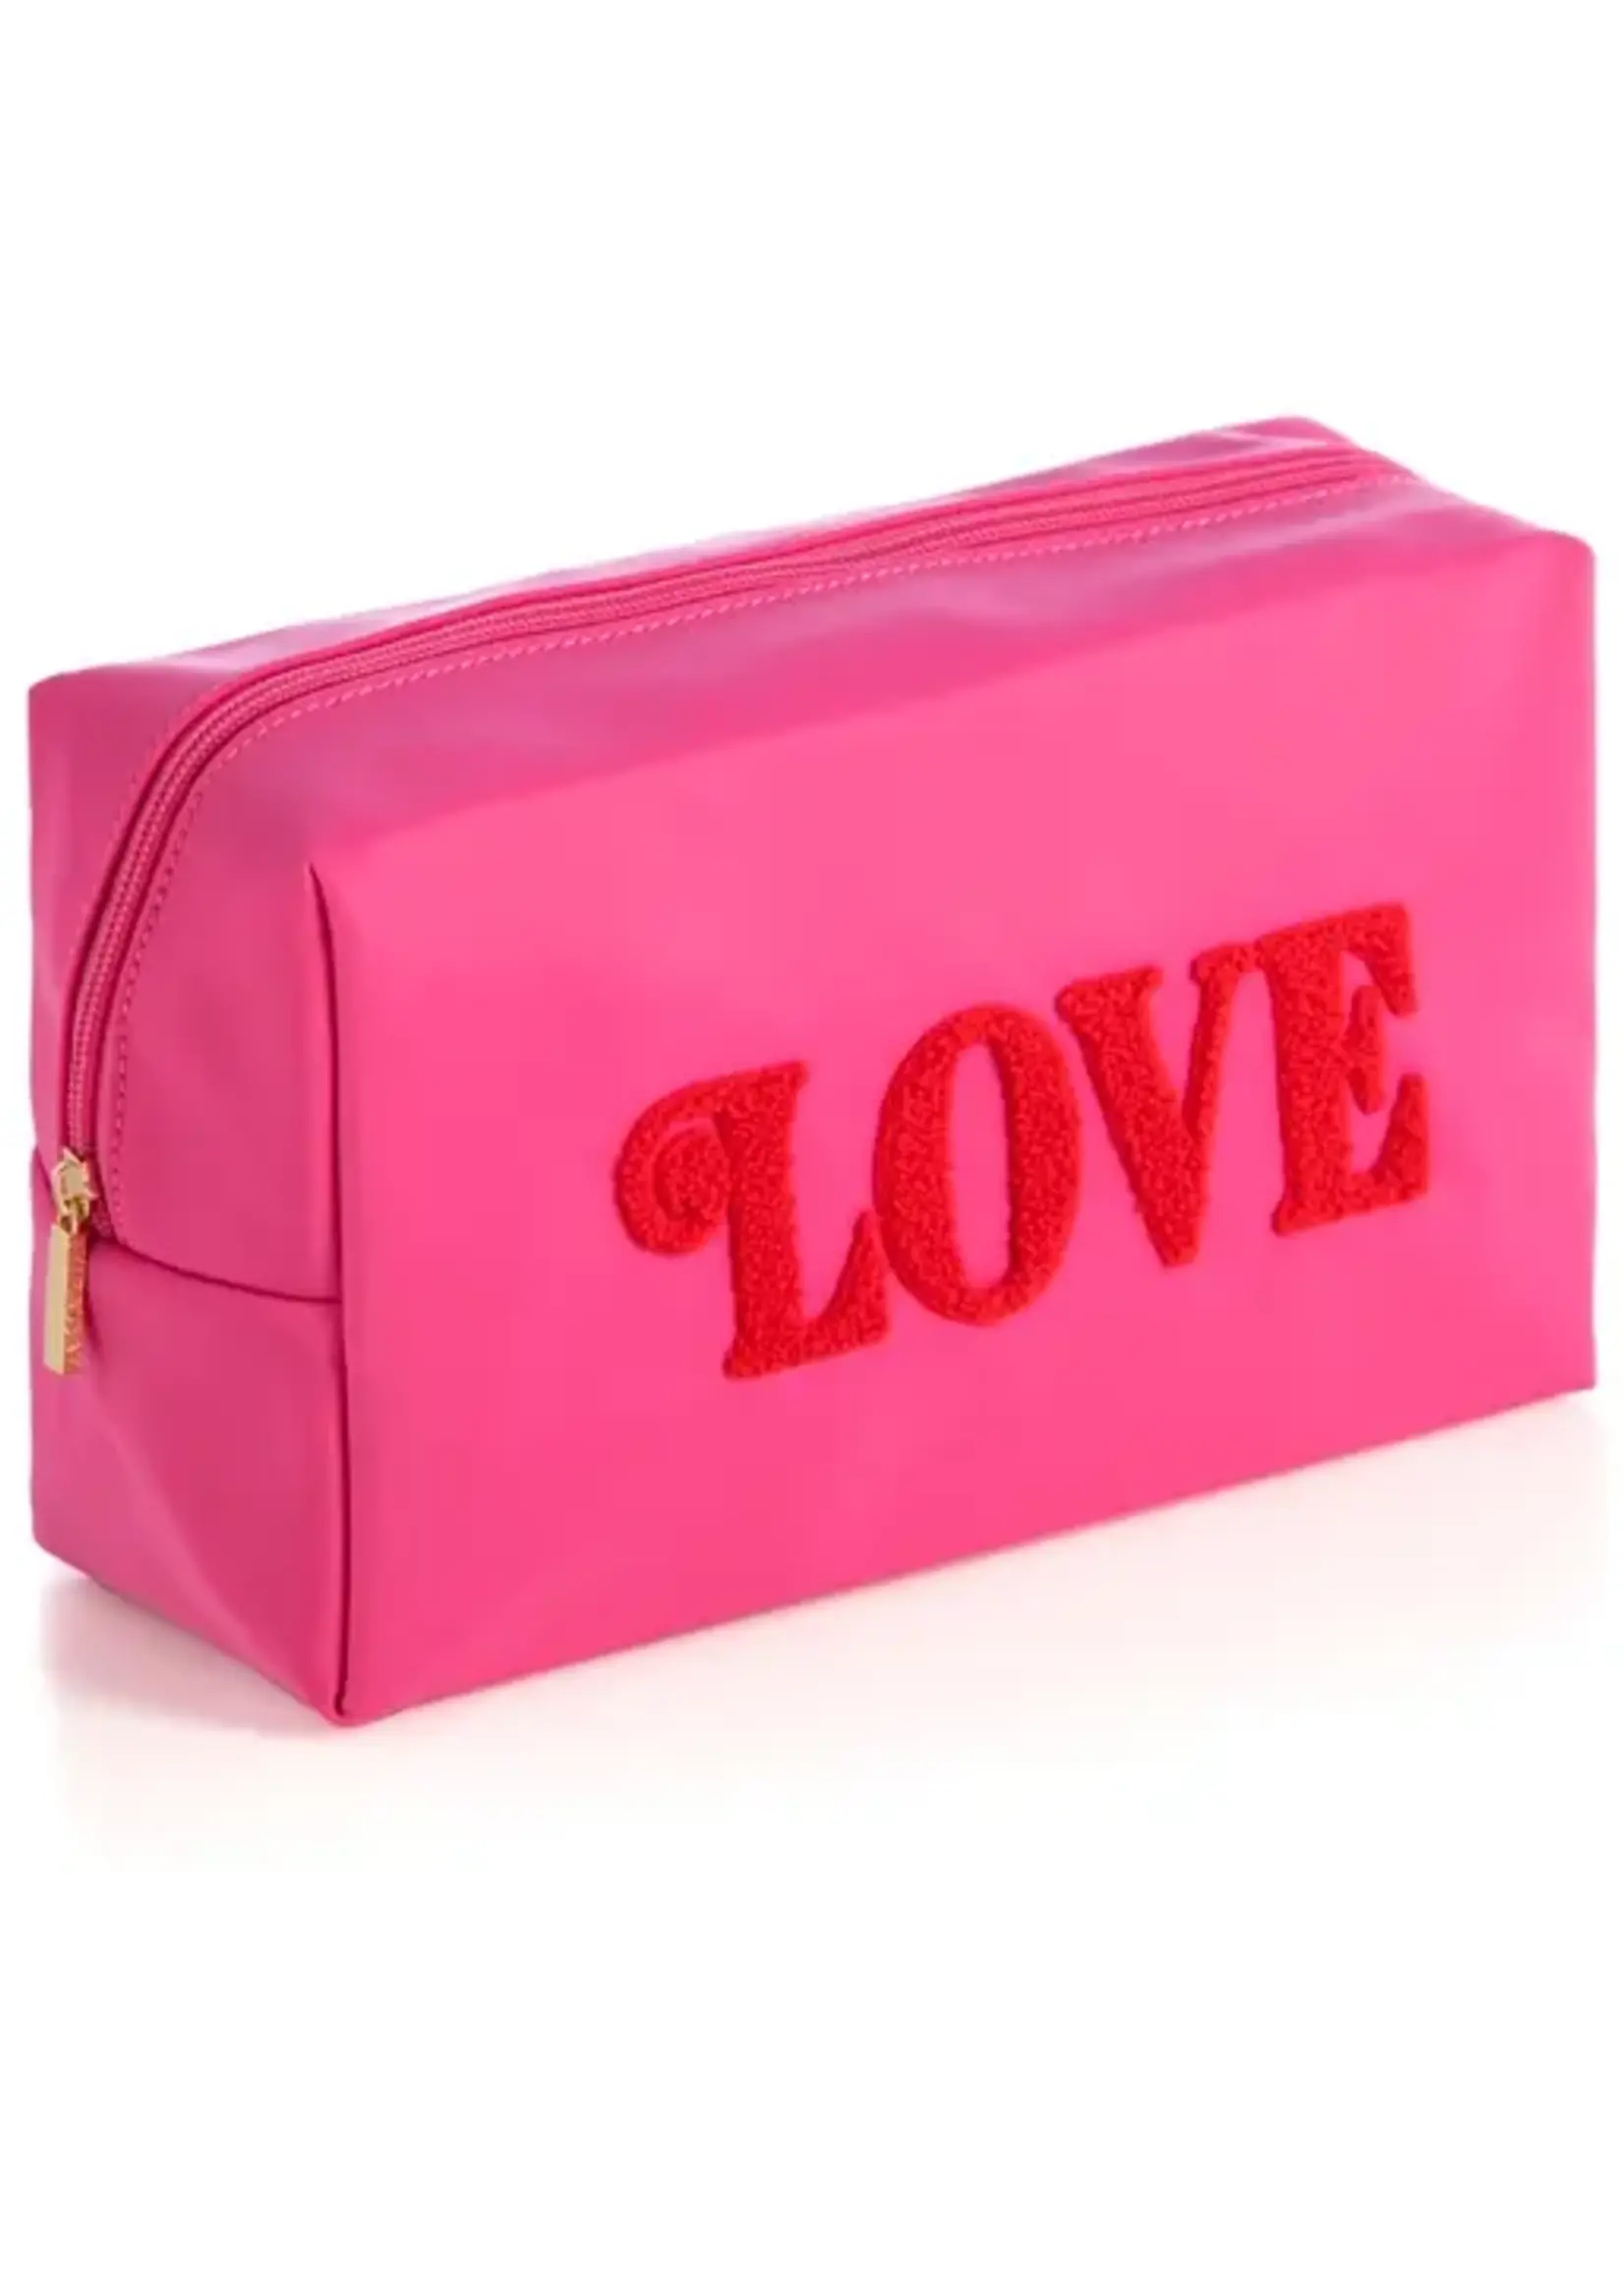 Creative Twist Events CARA "LOVE" LARGE COSMETIC POUCH, PINK